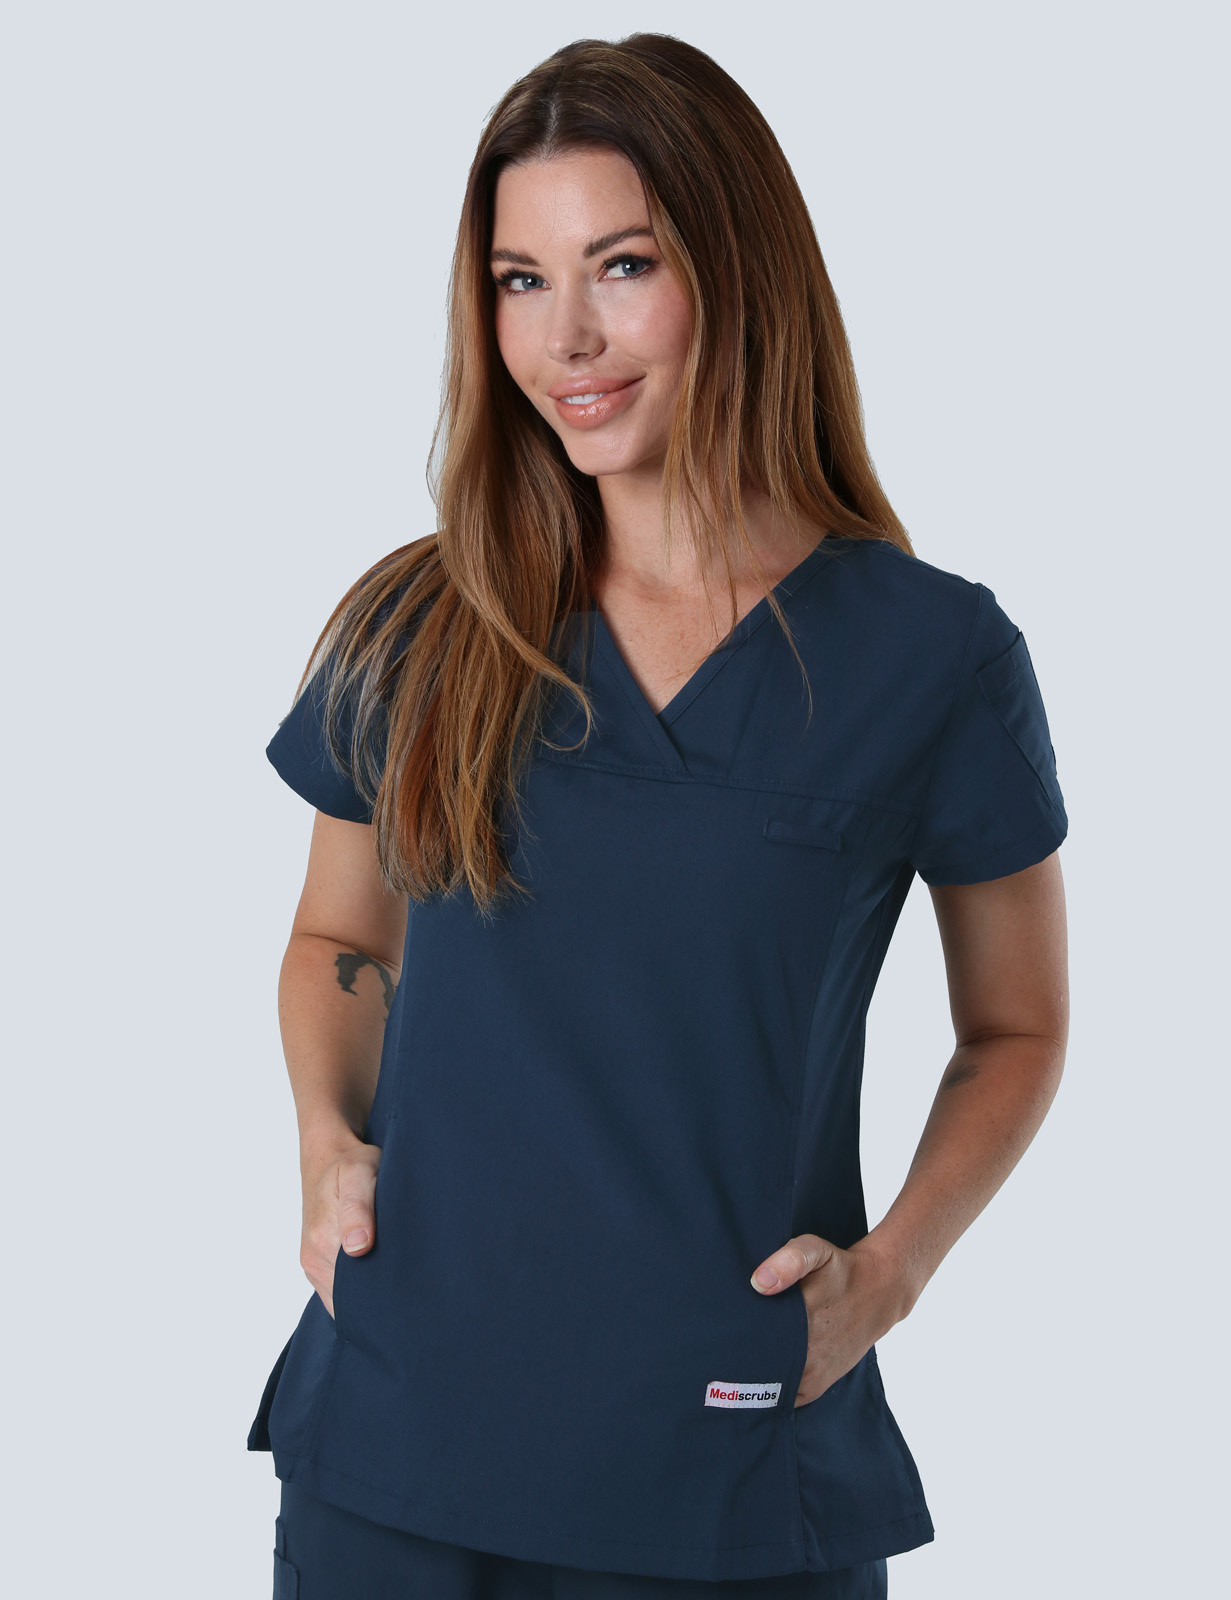 Cairns Base Hospital - Doctor (Women's Fit Solid Scrub Top and Cargo Pants in Navy incl Logos)